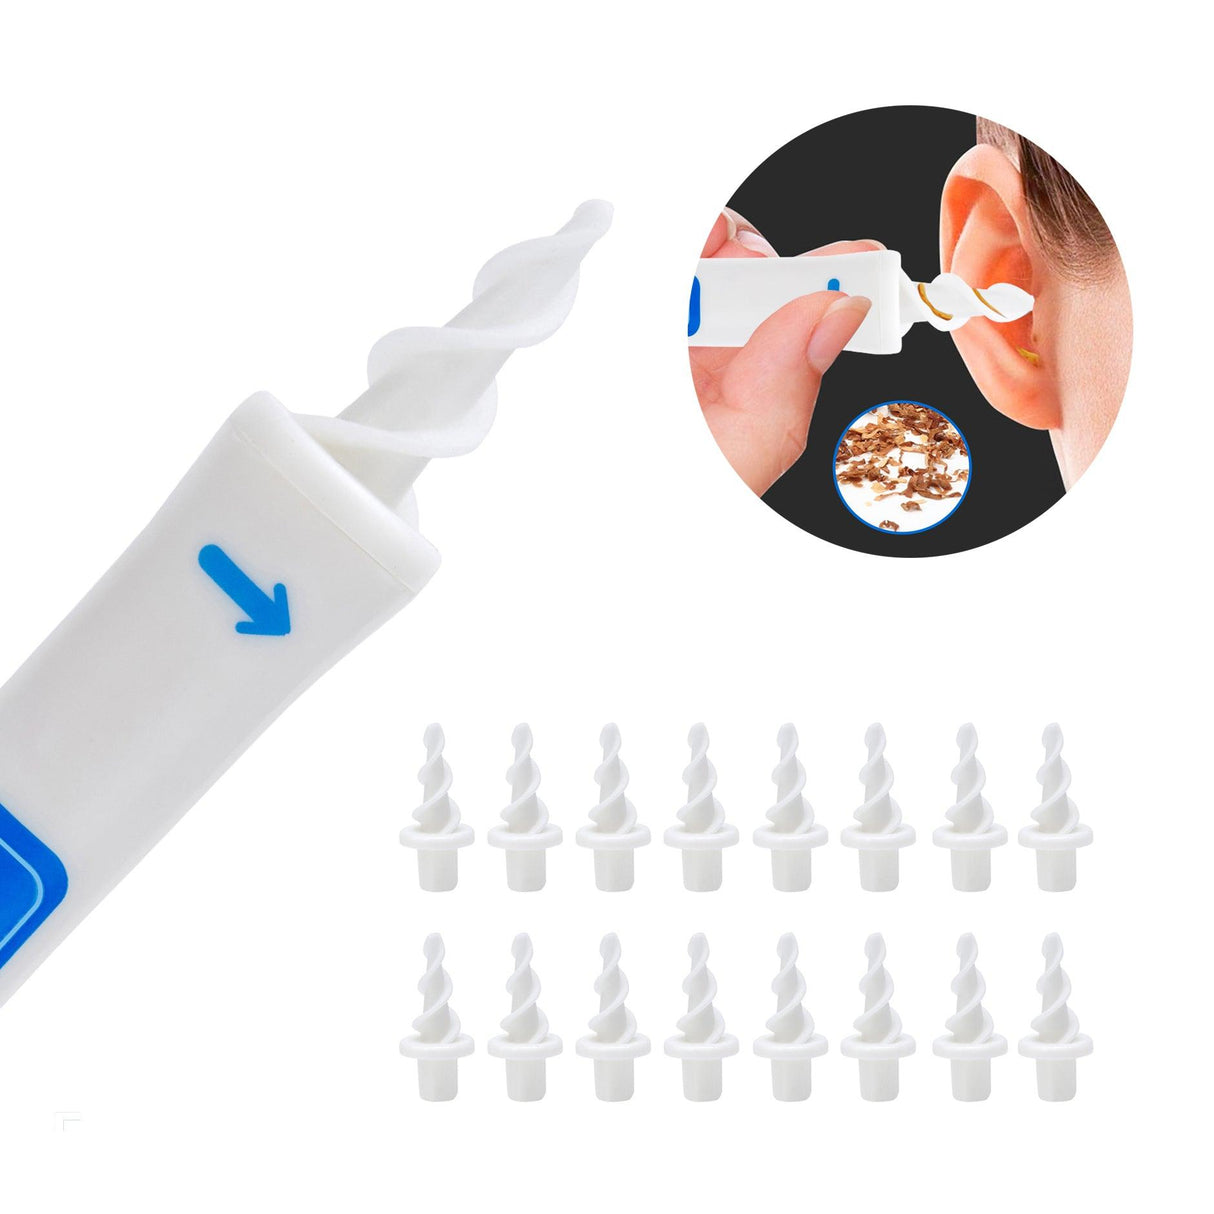 Ear Wax Cleaner/Remover Tool with Plastic box 16pcs/set - Glowish